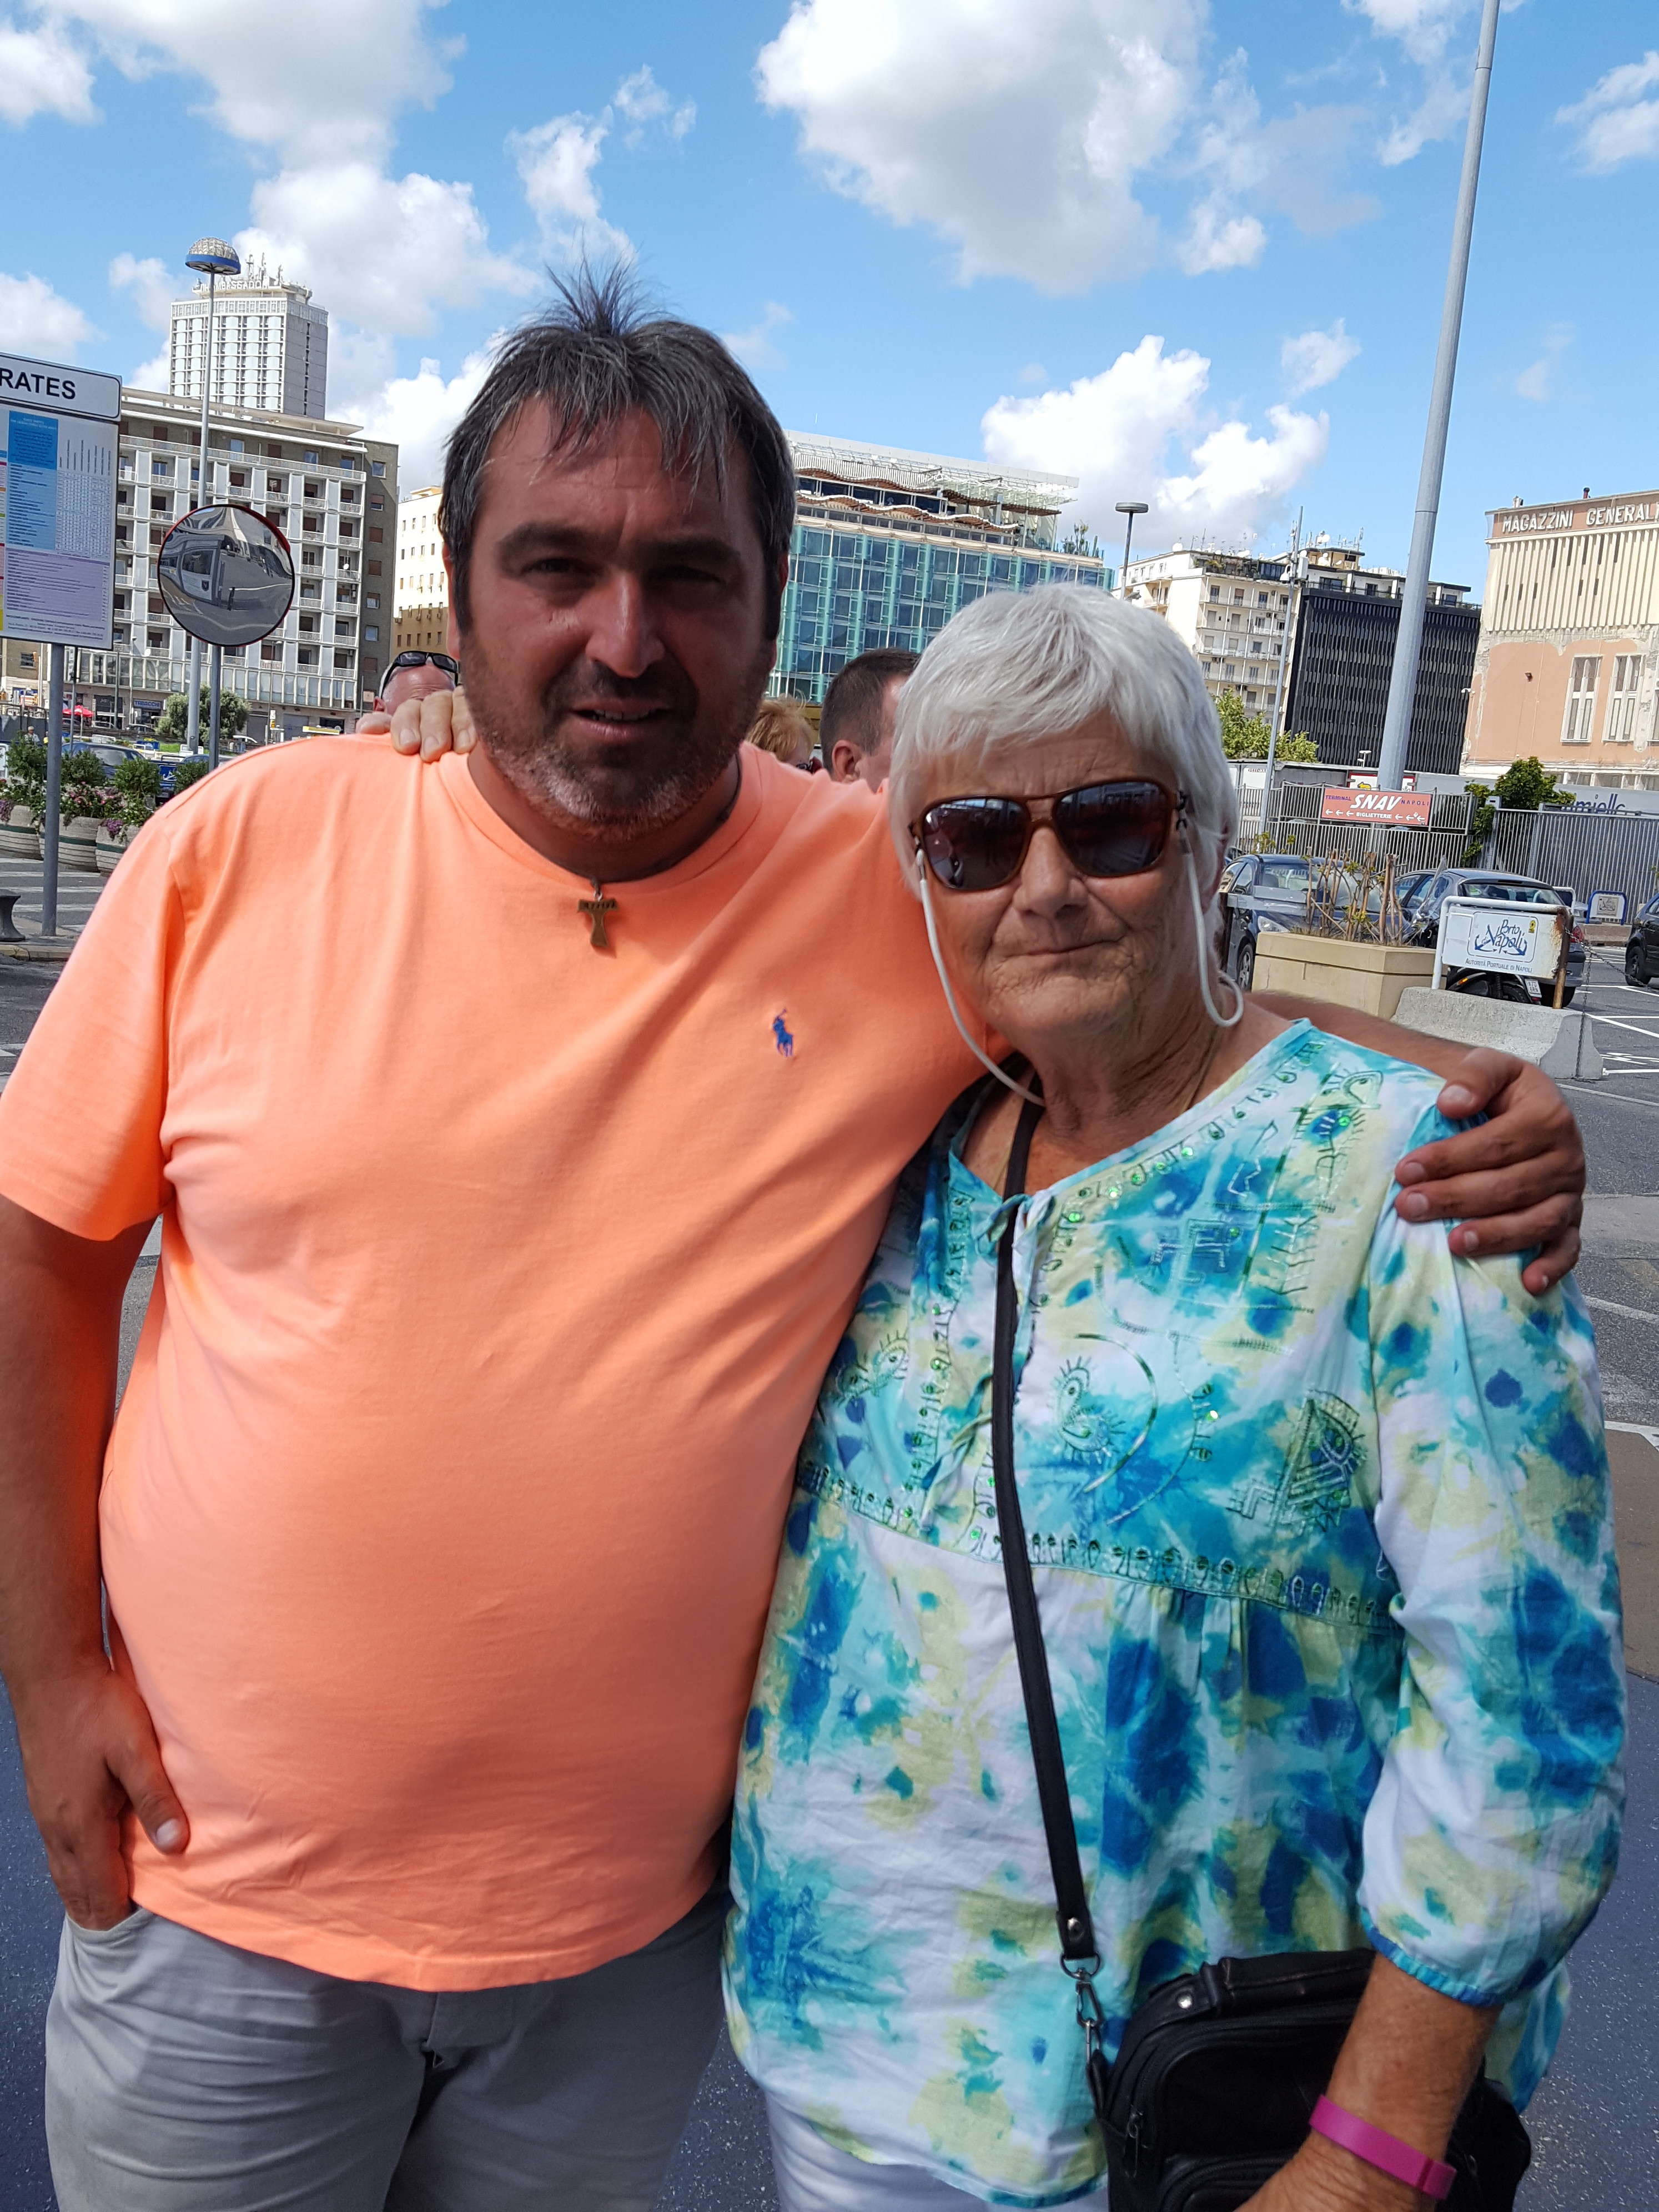 Our driver, Pino and Susan became buddies